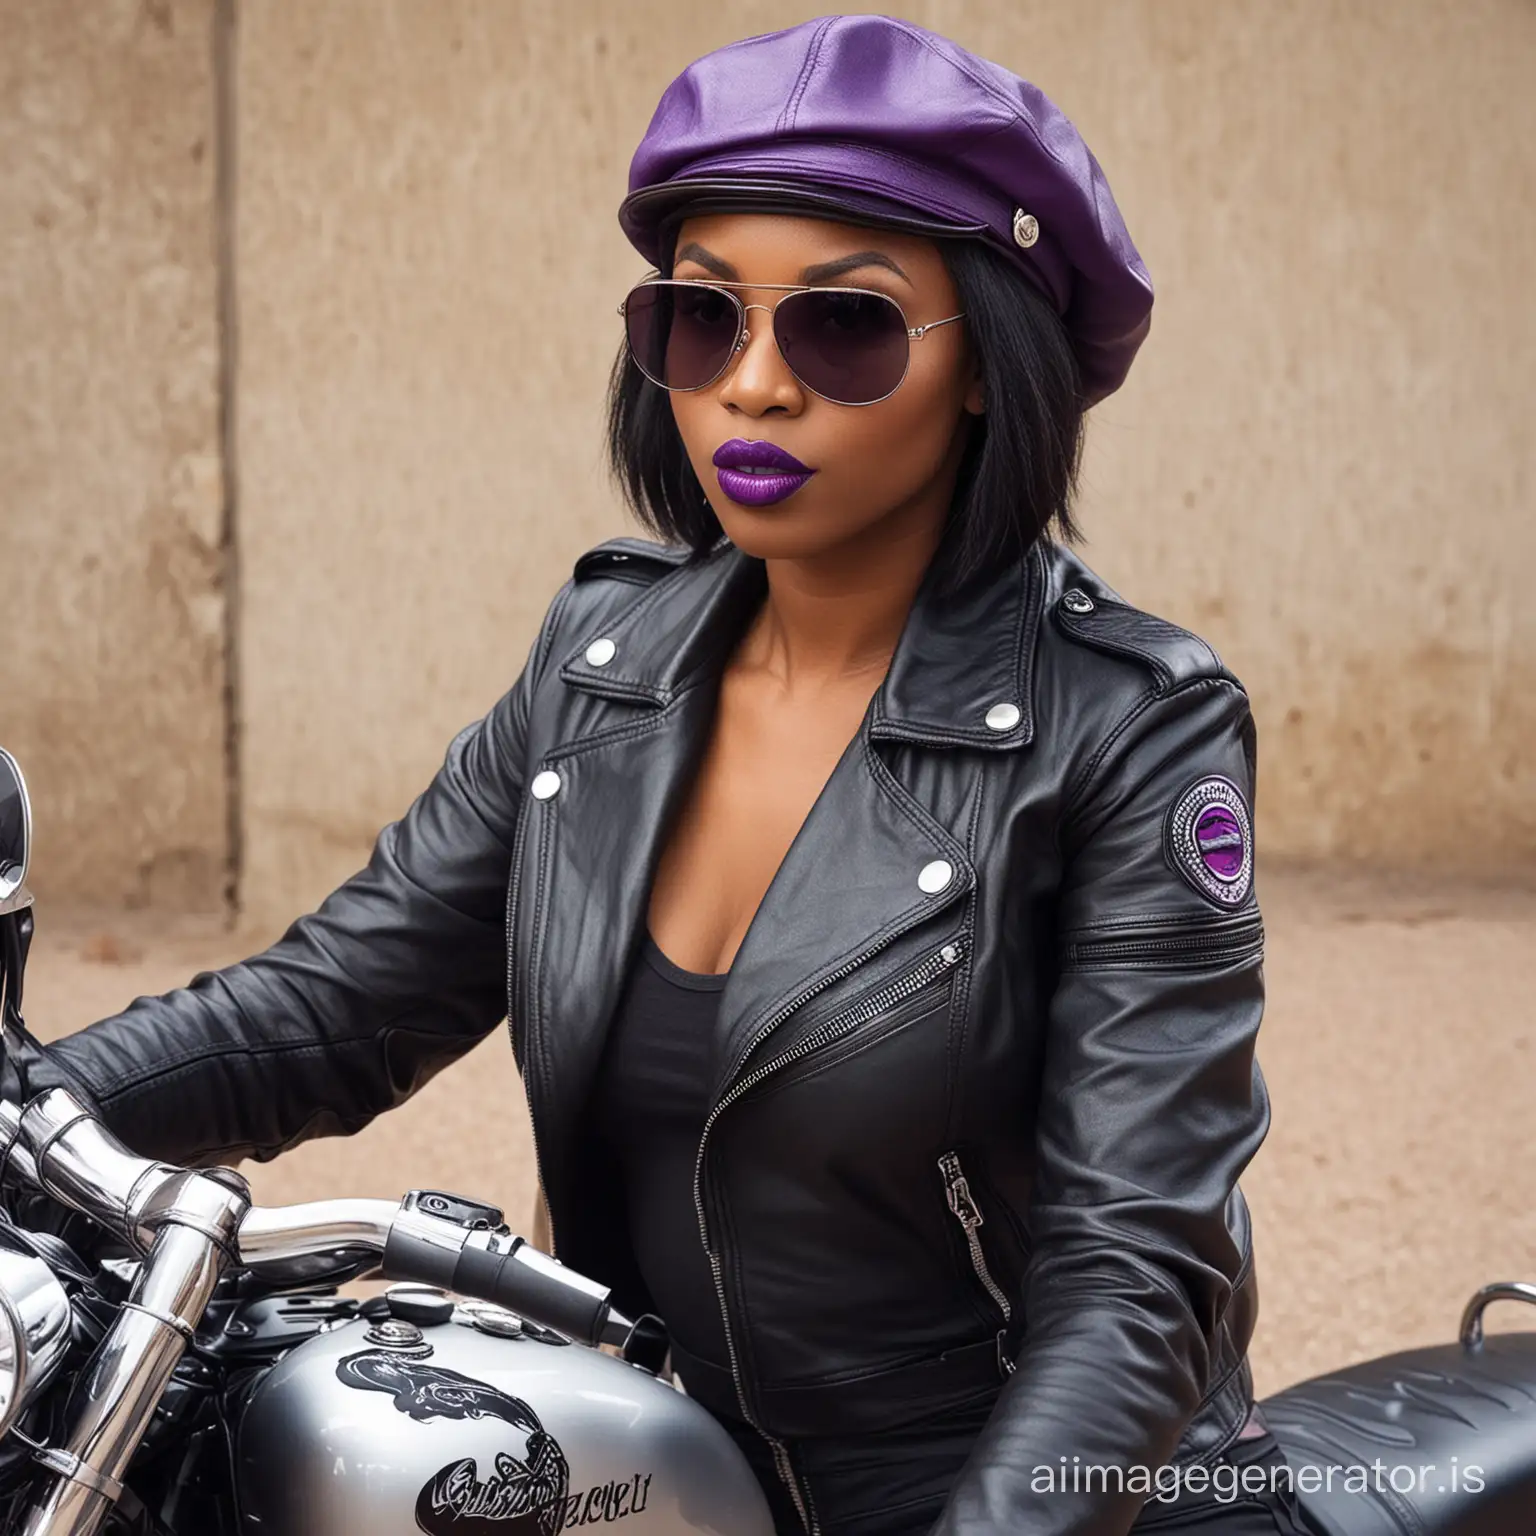 African motorcycle bitch with purple lipstick, leather biker cap and sunglasses